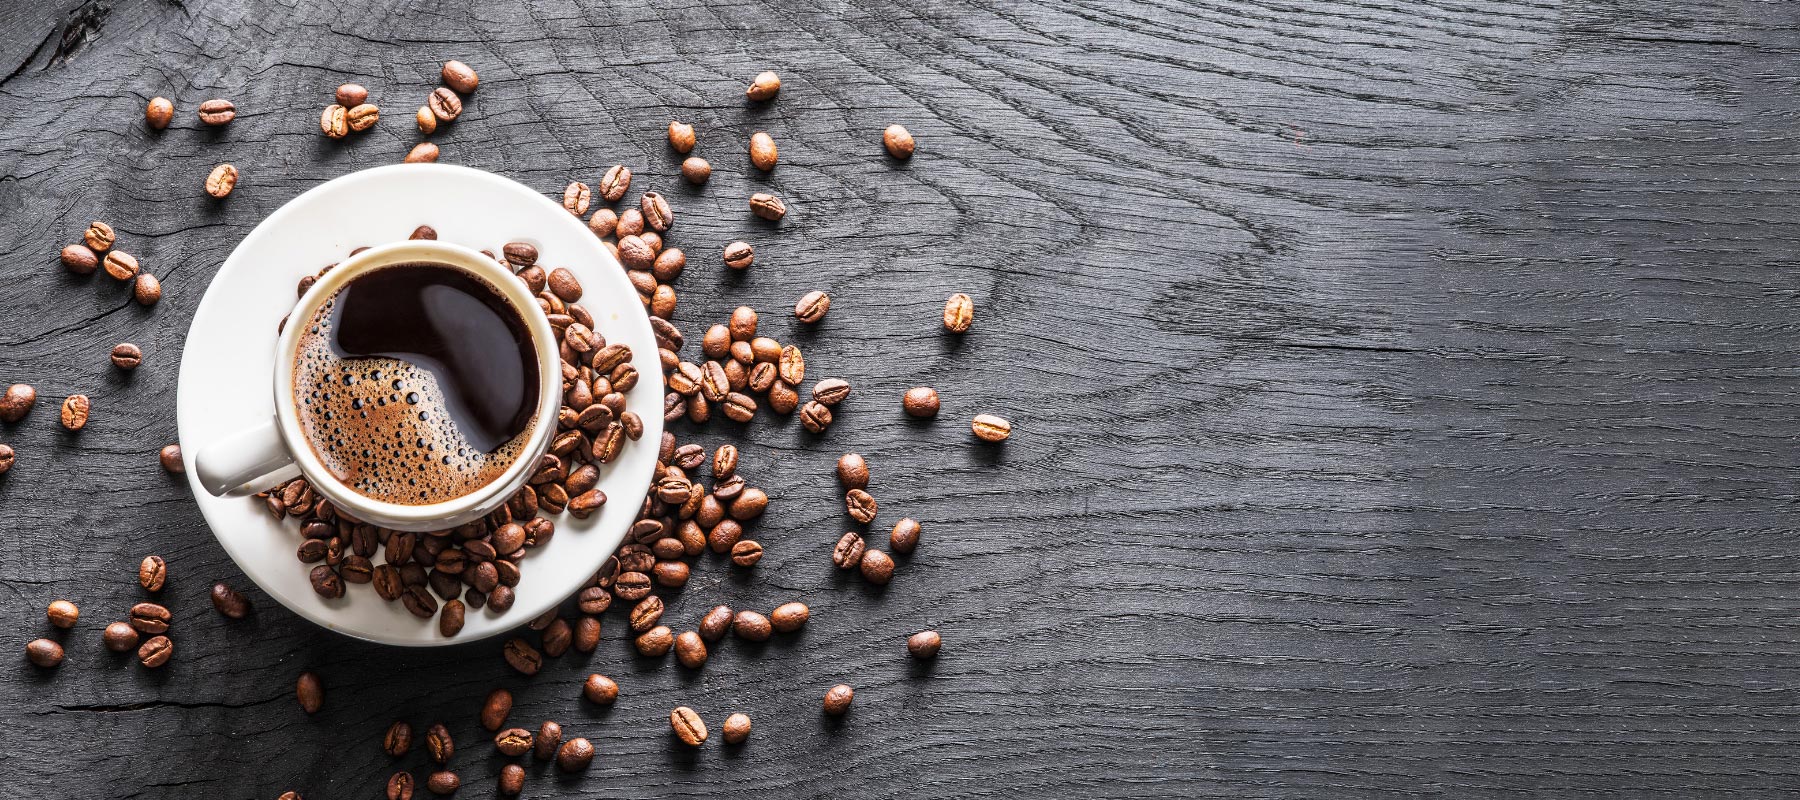 Coffee and espresso beans against a grey background.